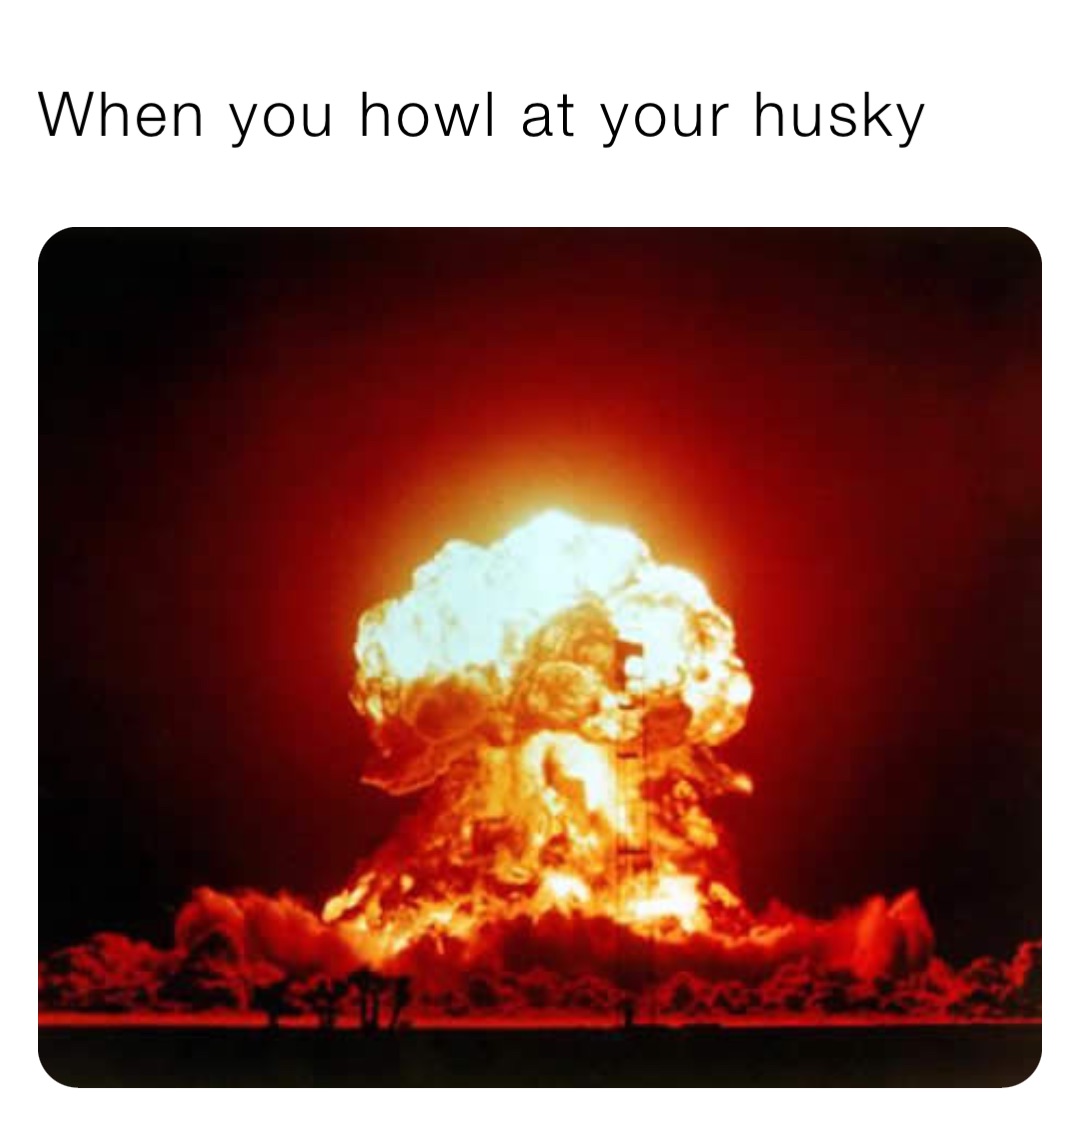 When you howl at your husky